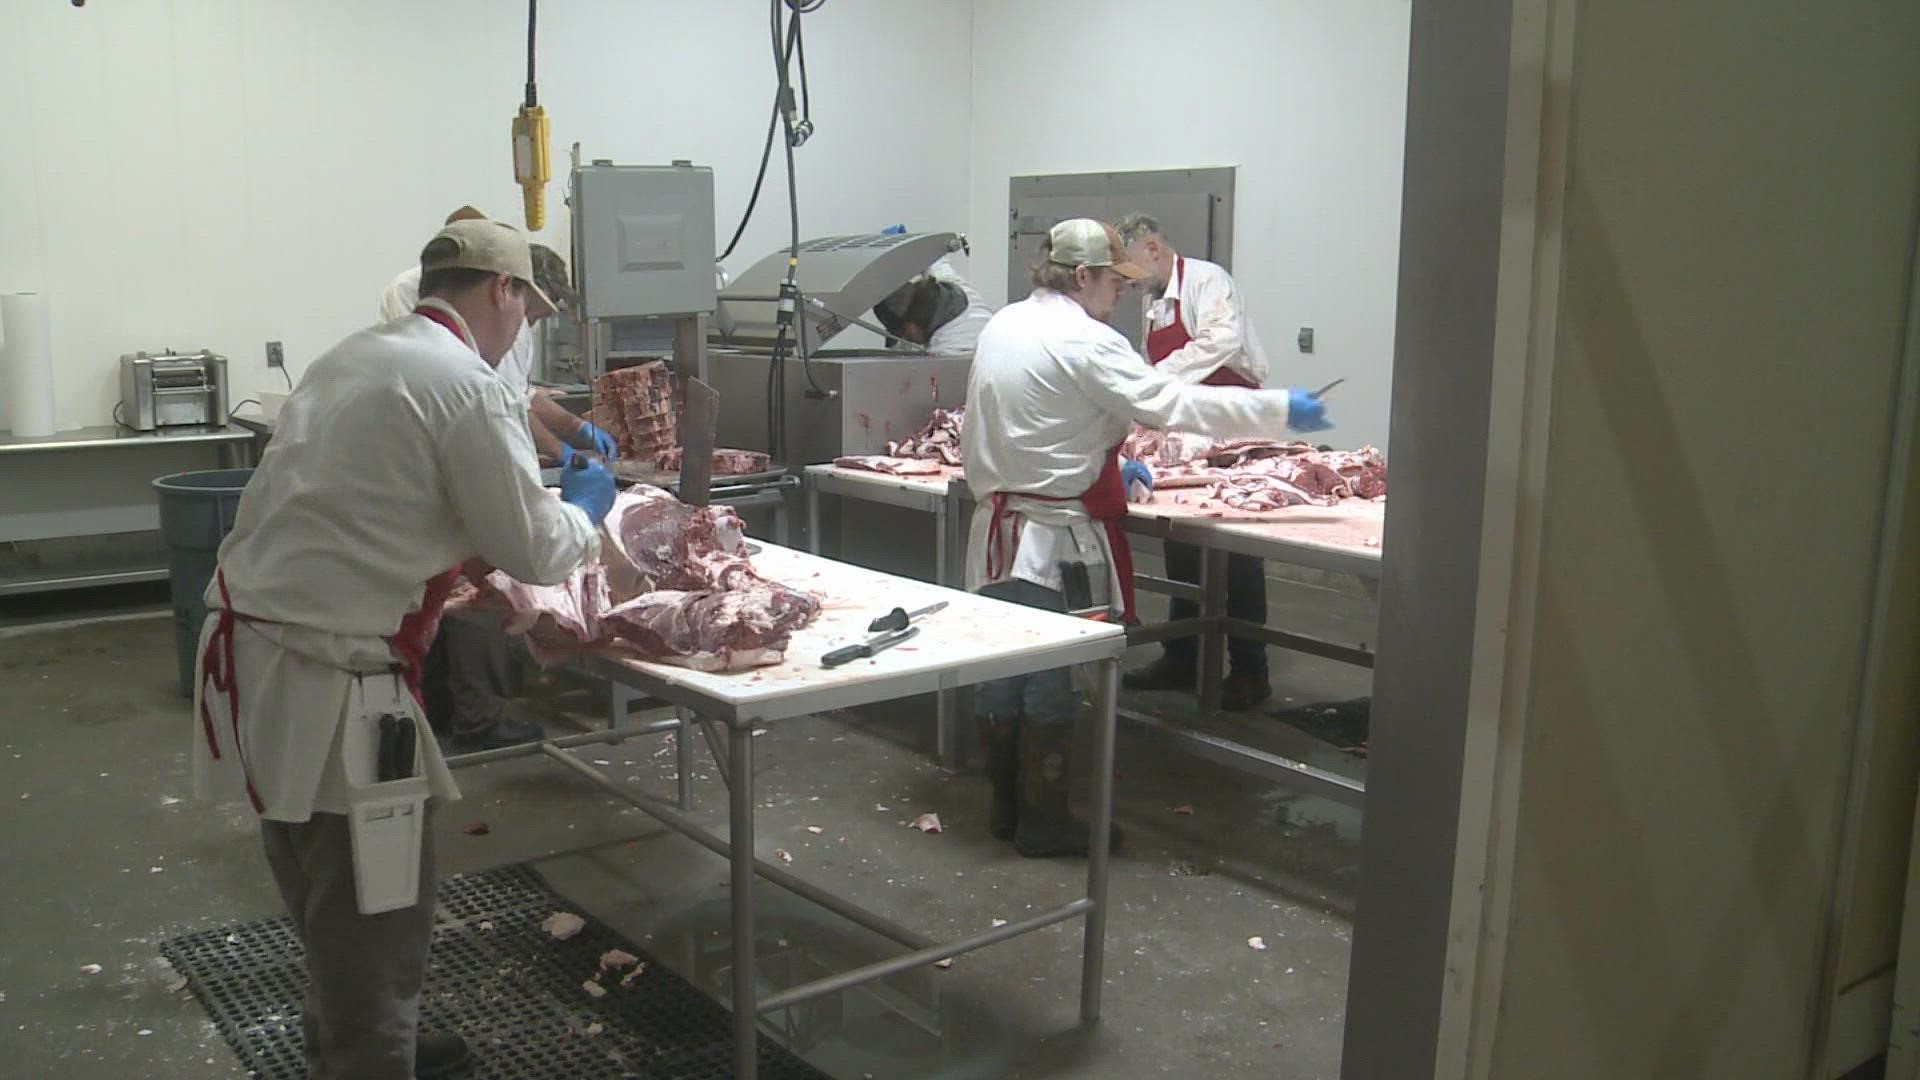 A shortage of labor in the processing portion of the meat supply chain has led to some stores with empty meat coolers.